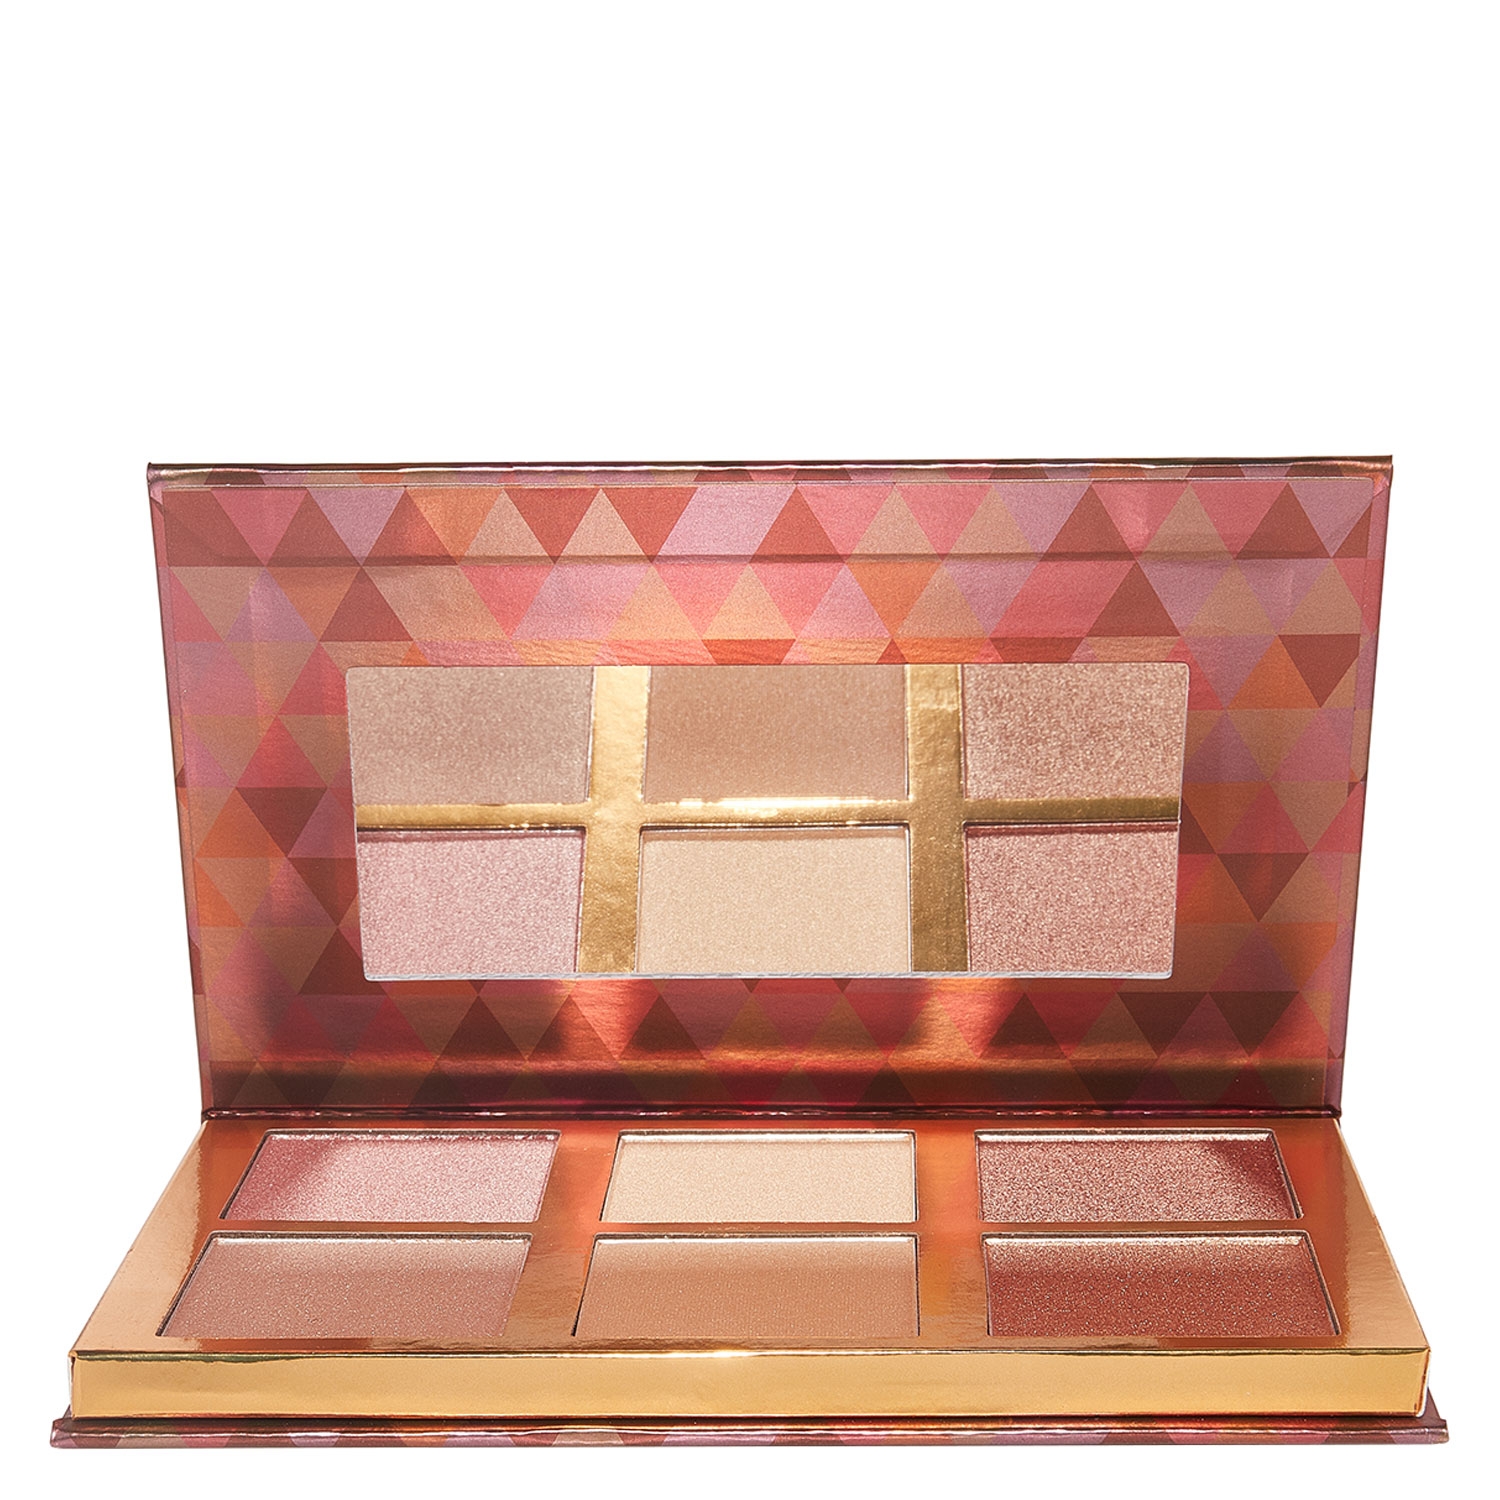 Product image from bellapierre Teint - Glowing Palette